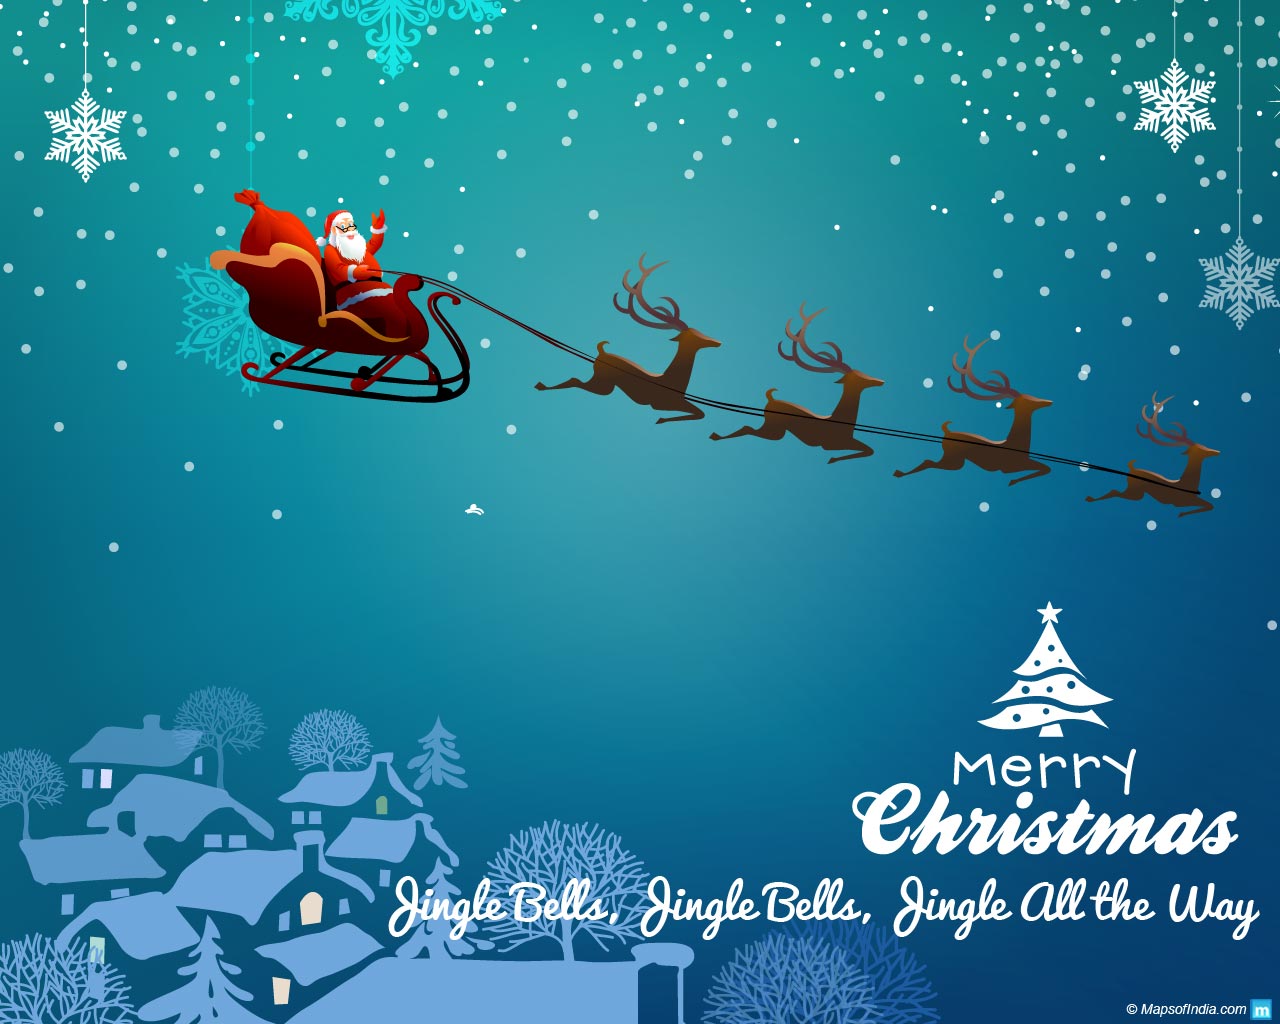 Christmas Wallpapers and Images Free Download Christmas